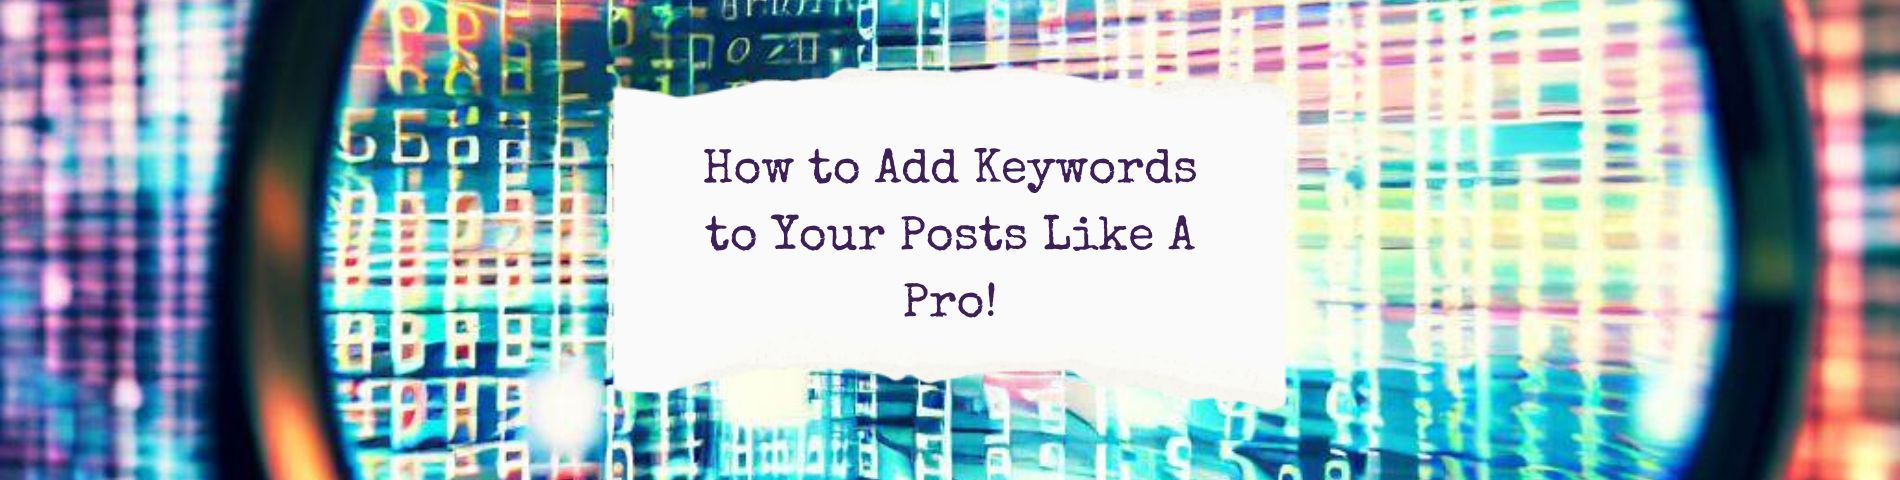 How to Add Keywords to Your Posts Like A Pro! - Linguakey blog